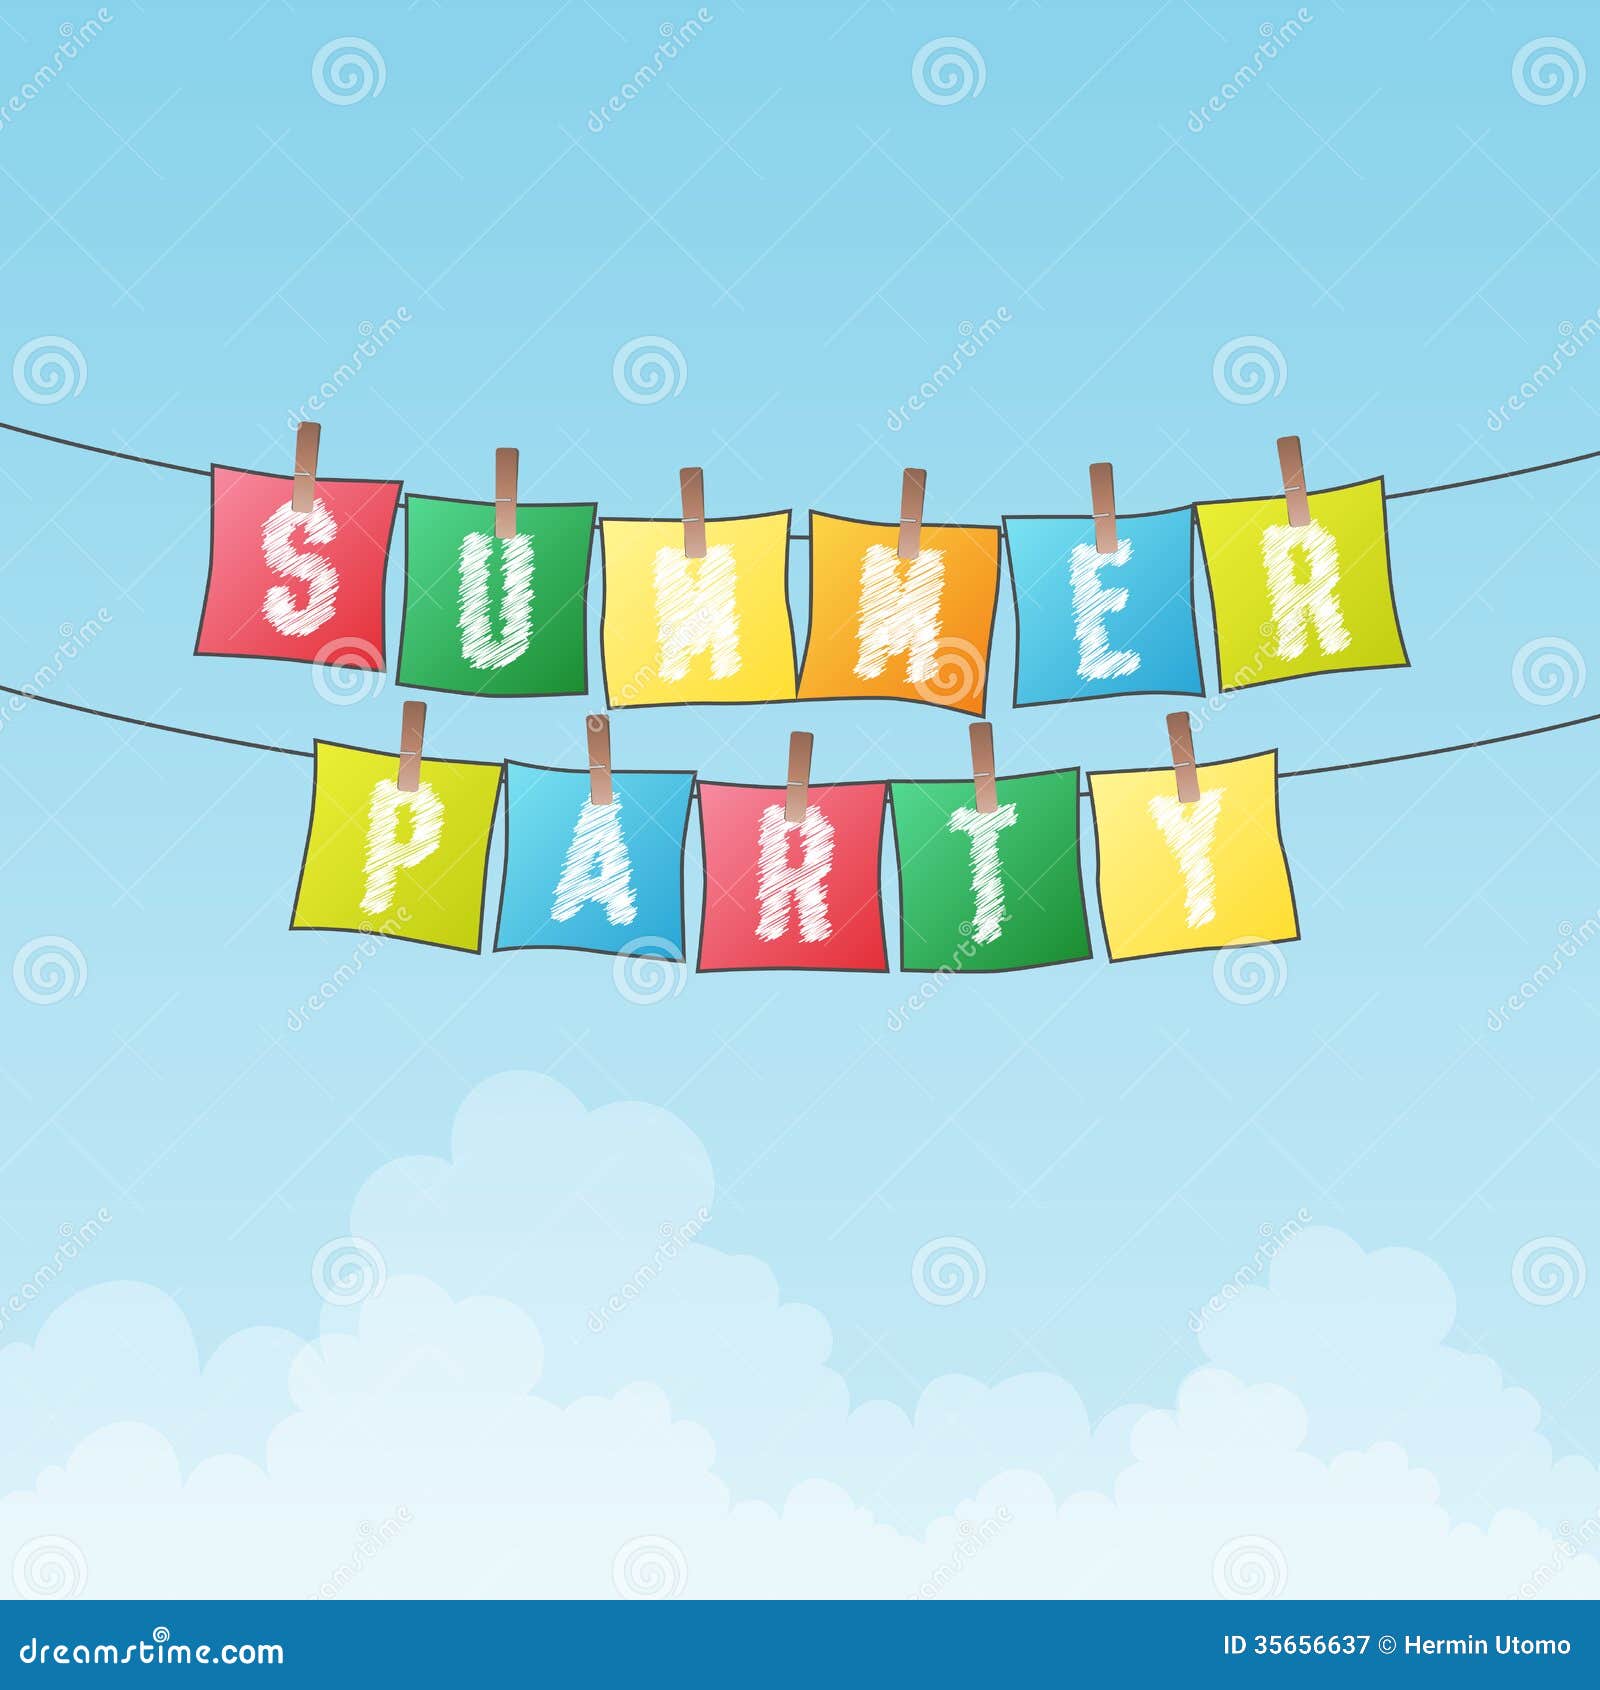 clipart summer party - photo #14